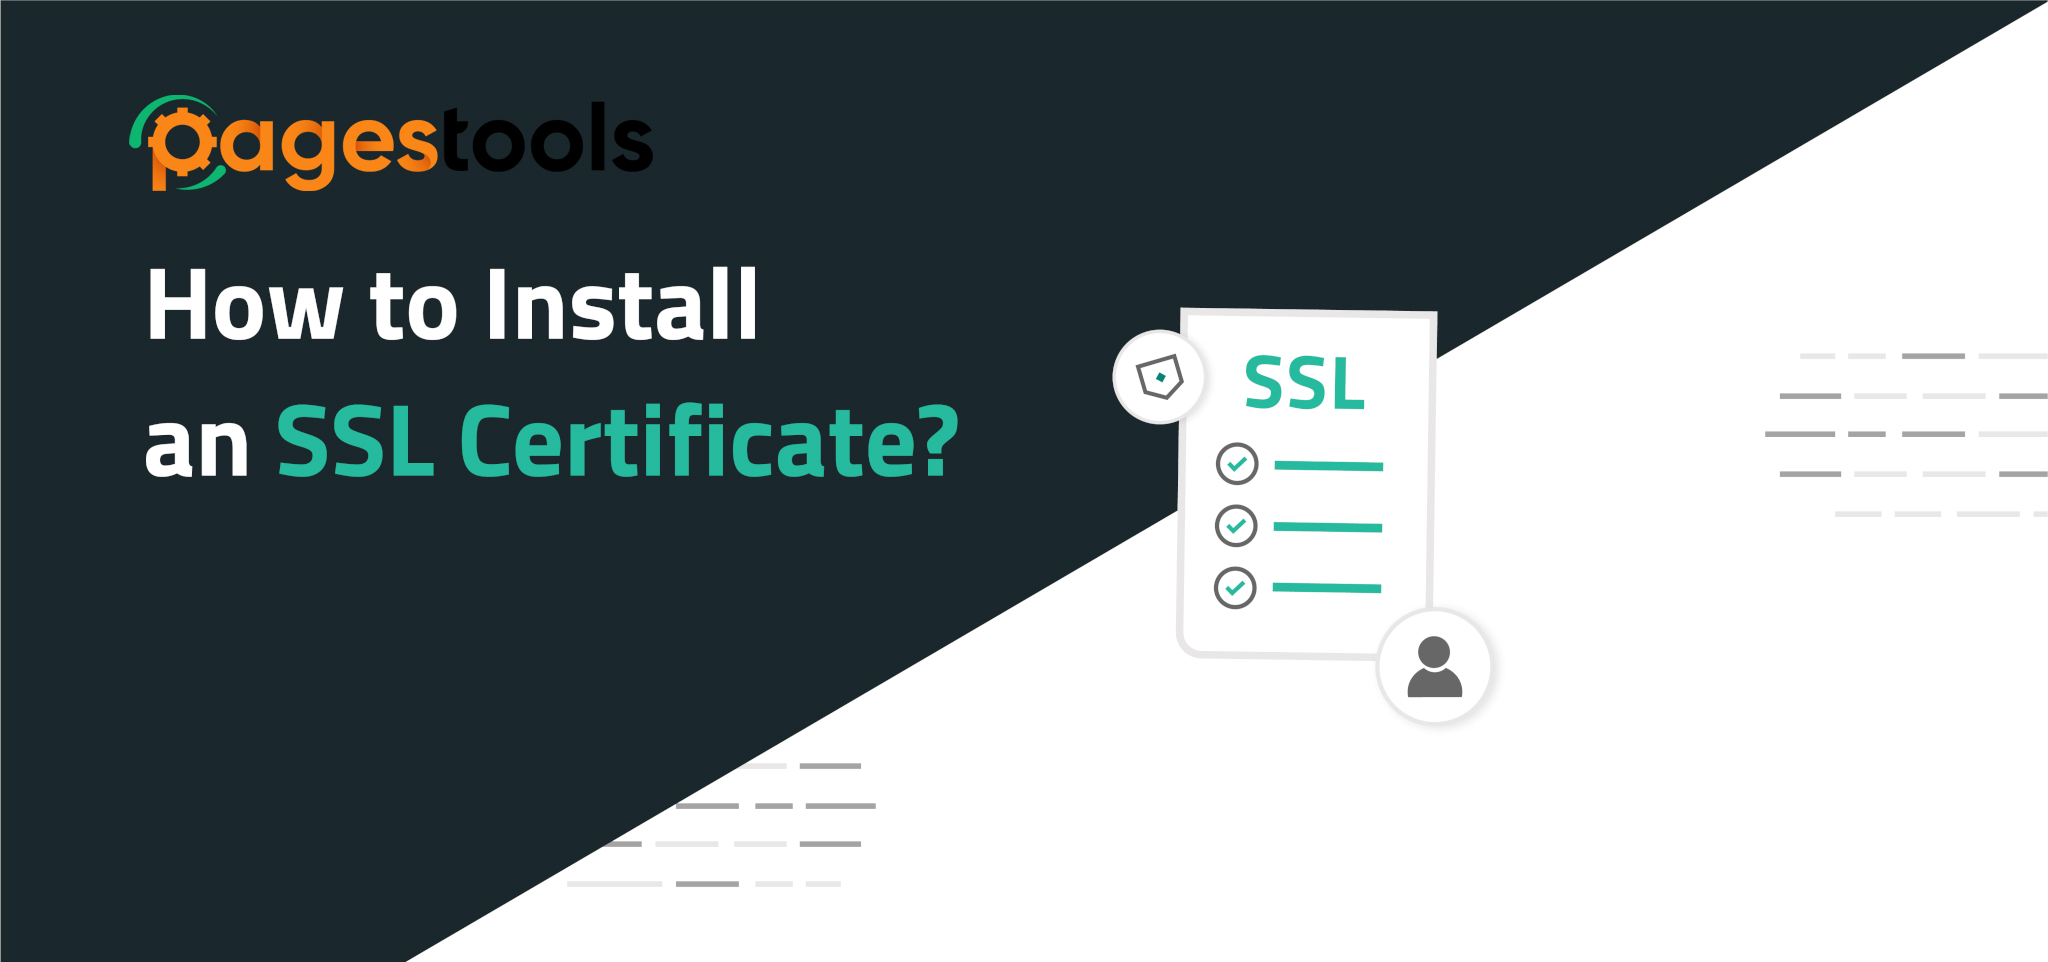 Illustration of SSL Certificate Acquisition and Installation